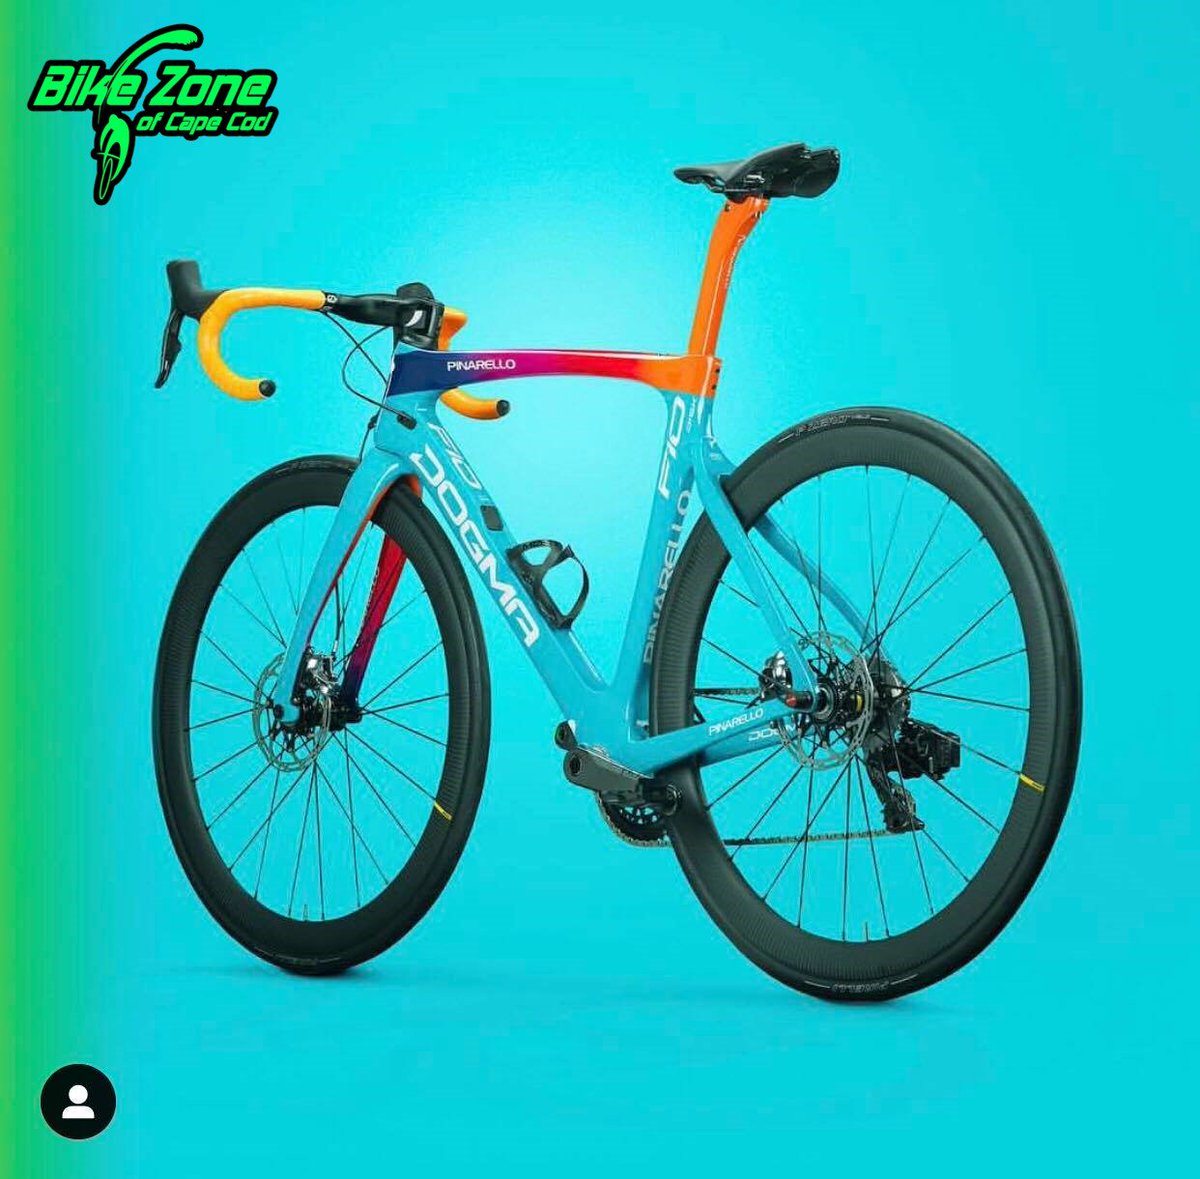 Check this out new F10 Disc spring colors -  #pinarellof10 #pinarello #pinarellodogma #pinarelloofficial #pinarellodogmaf10 #f10naturalbornwinner #pinarello_lovers #campagnolo #campagnolorecord #campagnolosrl #campagnoloeps #campagnolo #srametap #roadbike #cyclist